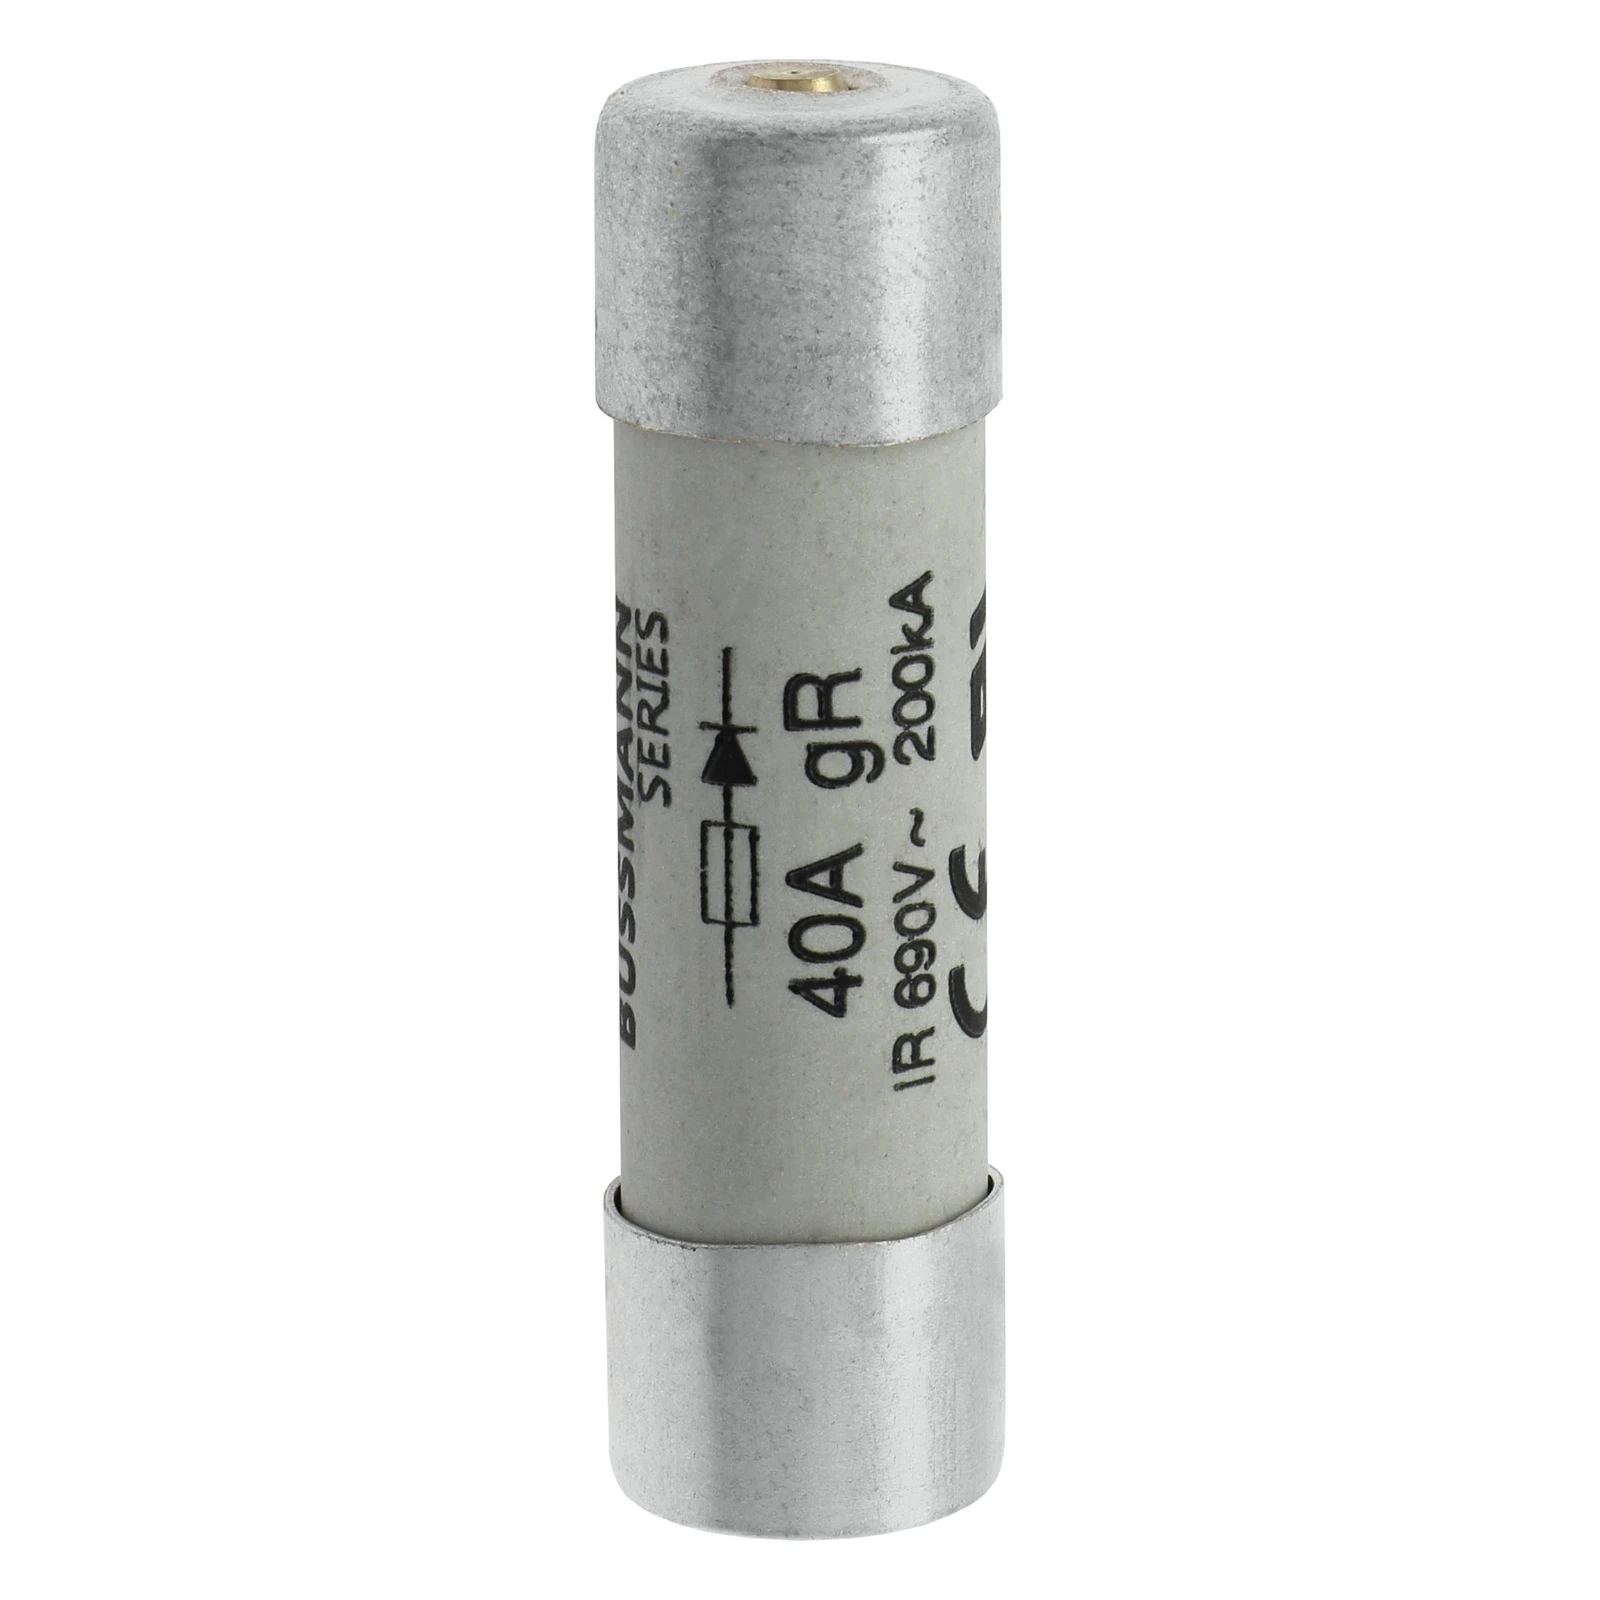 2545546 - Eaton Fuse 40A 690VAC gR 14x51 with Ind